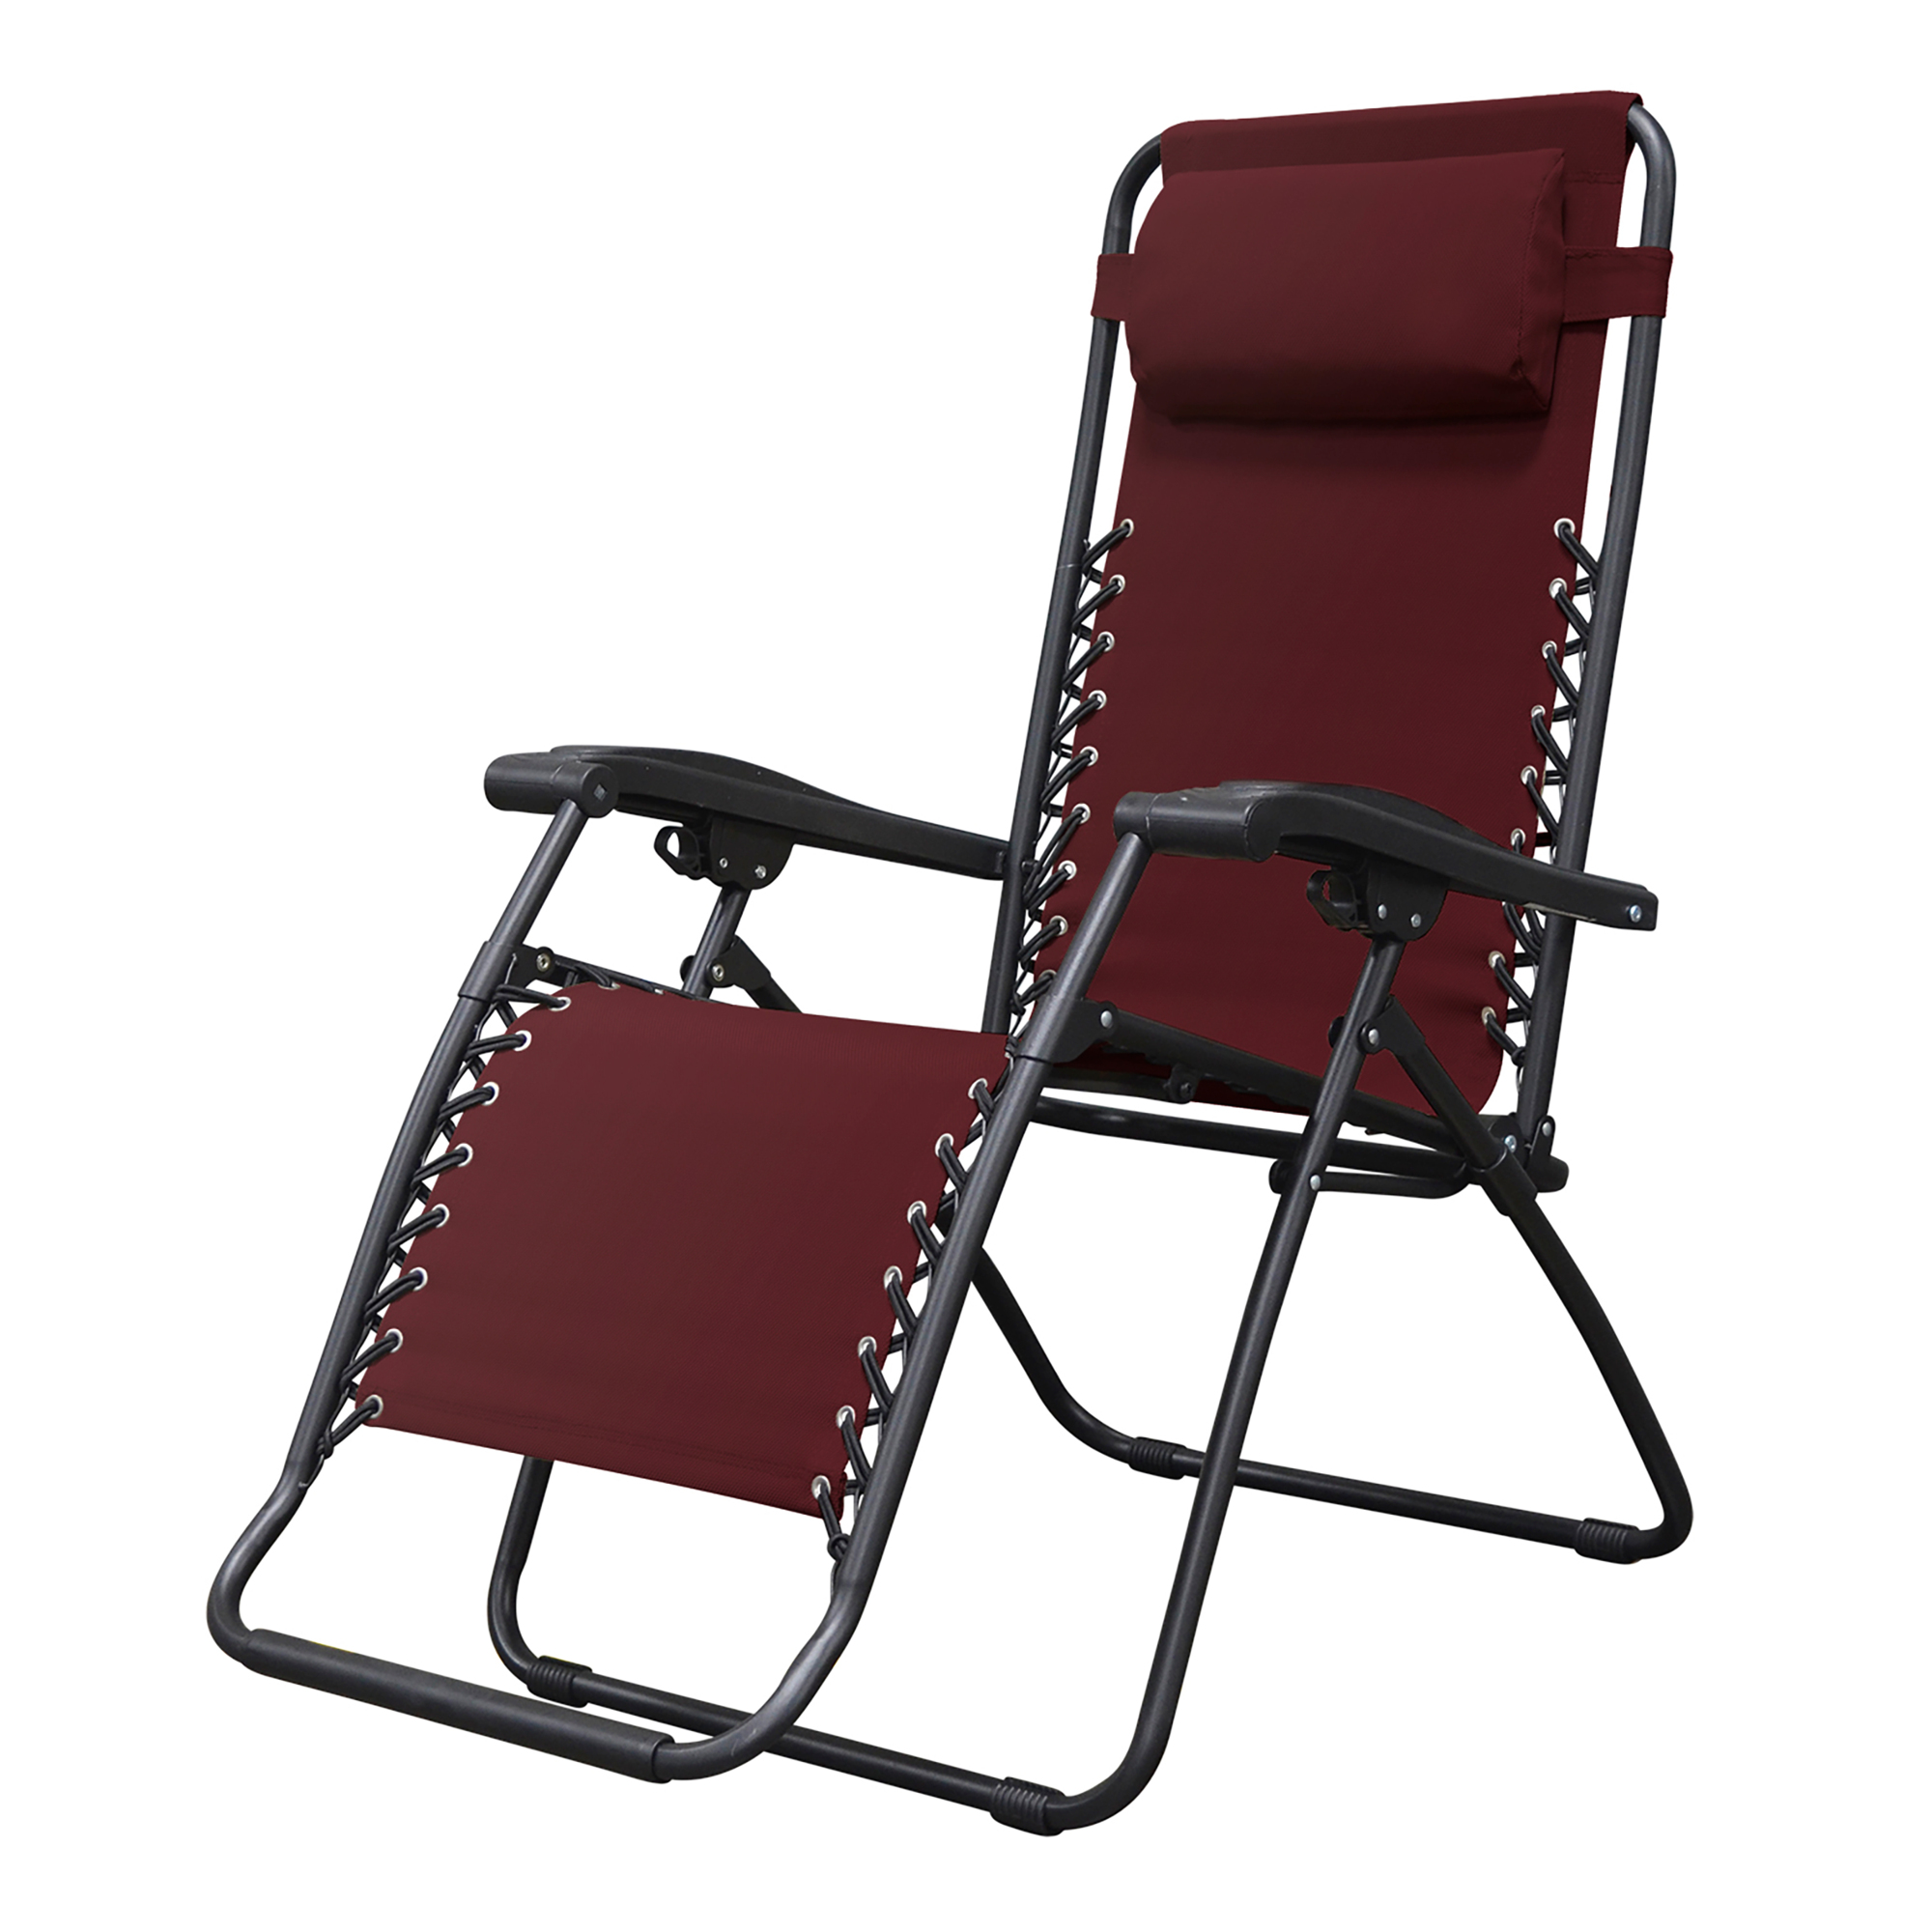 Caravan Canopy, Infinity Zero Gravity Chair Lounger, Primary Color Burgundy, Material Textile, Width 27.16 in, Model 80009000170